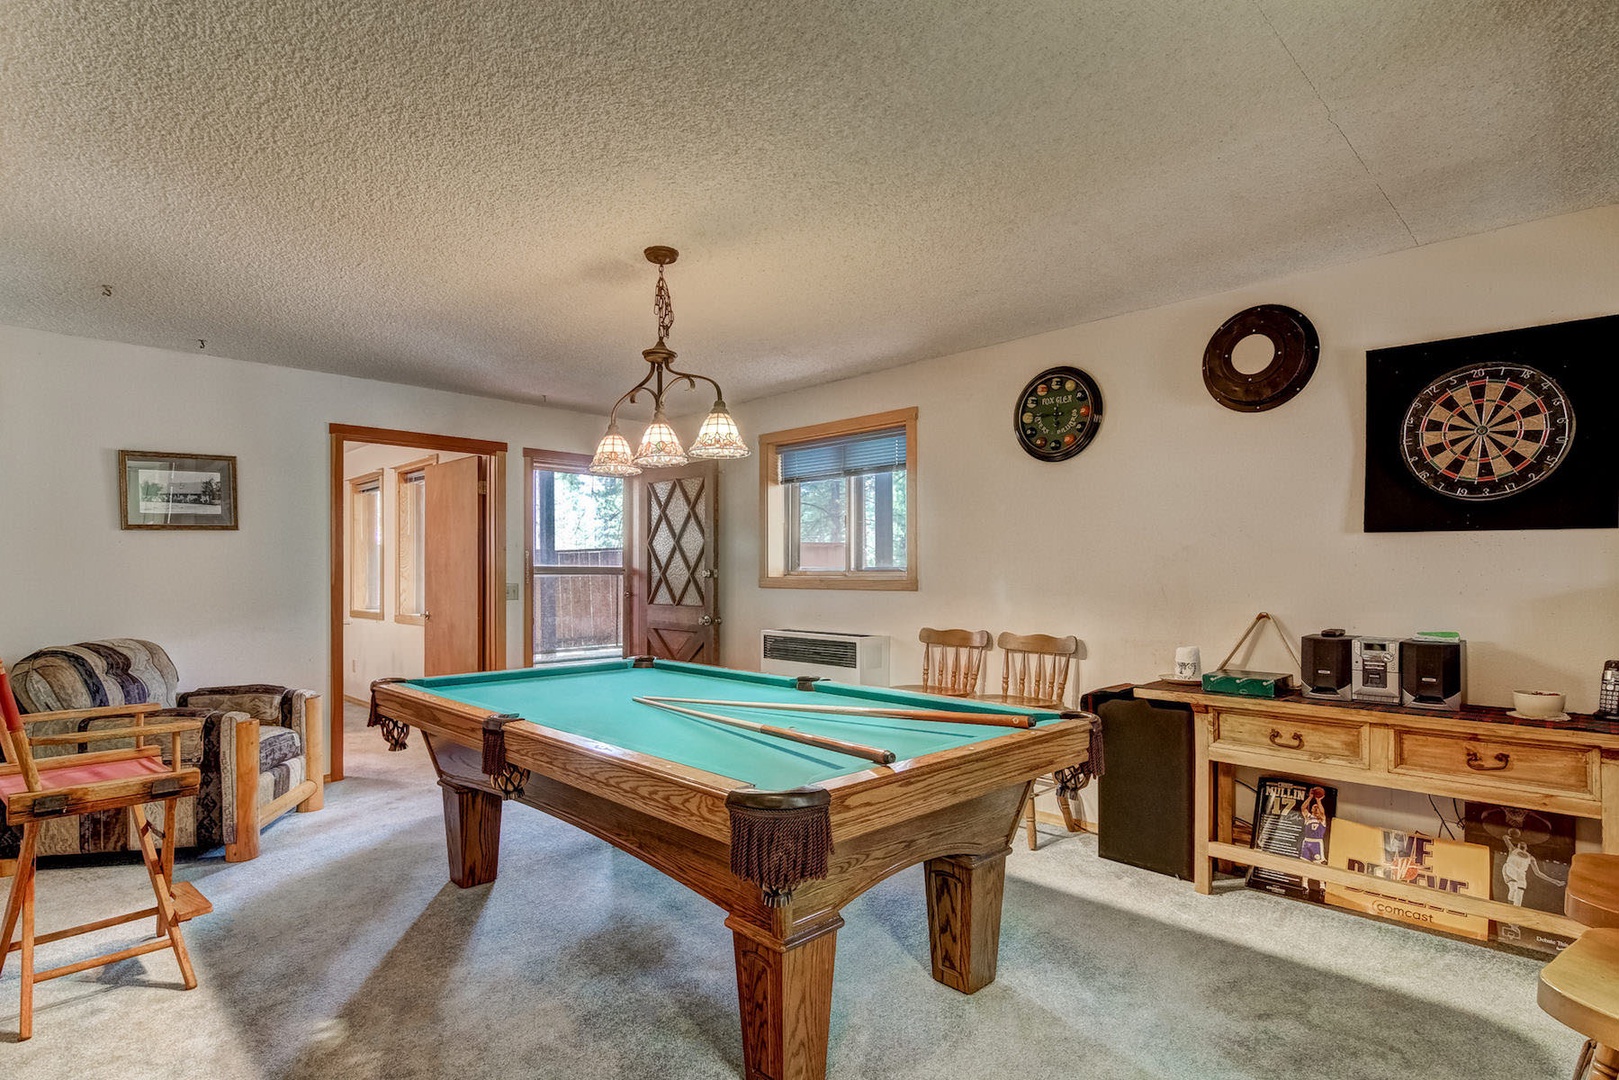 Game room w/ pool table